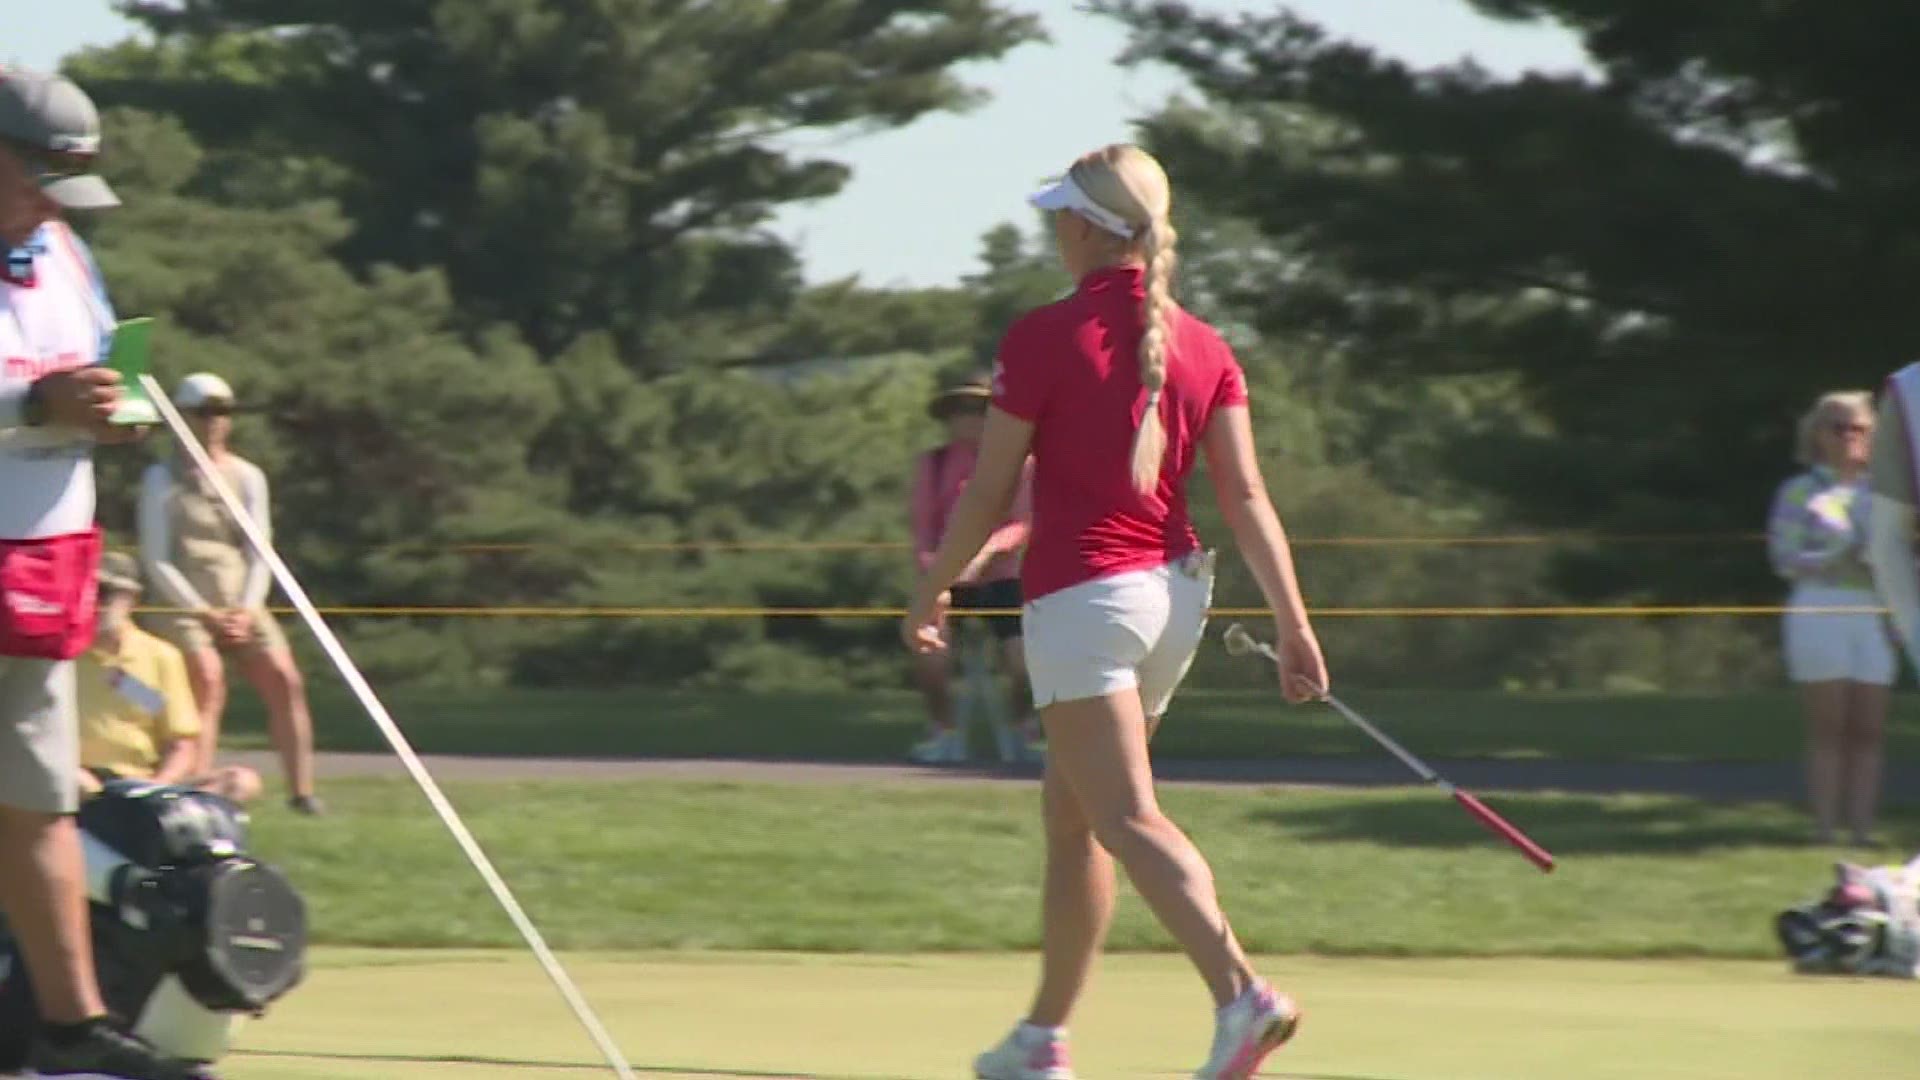 It was a beautiful day for golf at the Meijer LPGA Classic Thursday.